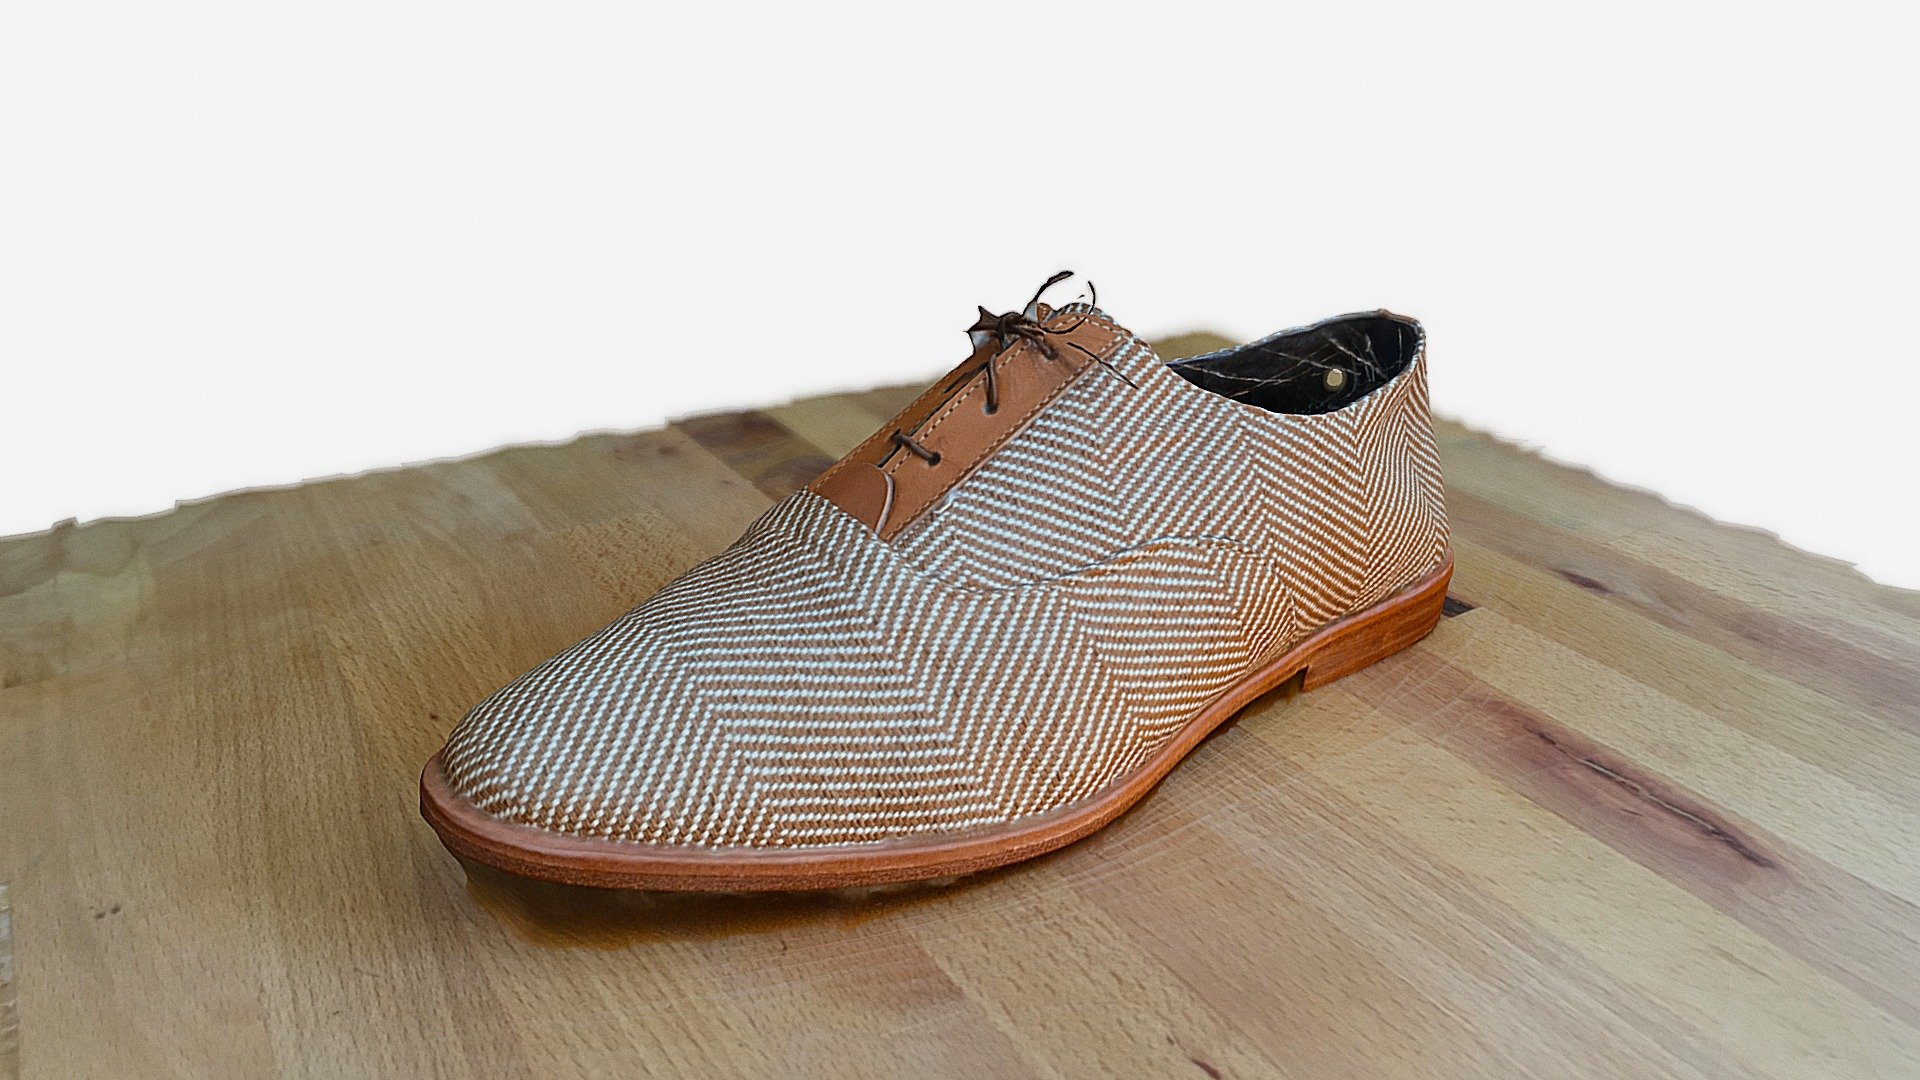 I discovered the Osborn shoe brand in Brooklyn a few years ago and fell in love. I just got a pair for my wife, here it is. It's beautifully handcrafted, with great leather.

I'm actually taking my first shoe making class this month, and the teacher is non other than Aaron Osborn, the founder of the brand, I can't wait!

In 2017, I'm publishing a 3D model every day, and sharing it on twitter with the hashtag #3Deveryday. Join the flock! - Day #8: Osborn Sand Dune Oxford shoe - 3D model by alban 3d model